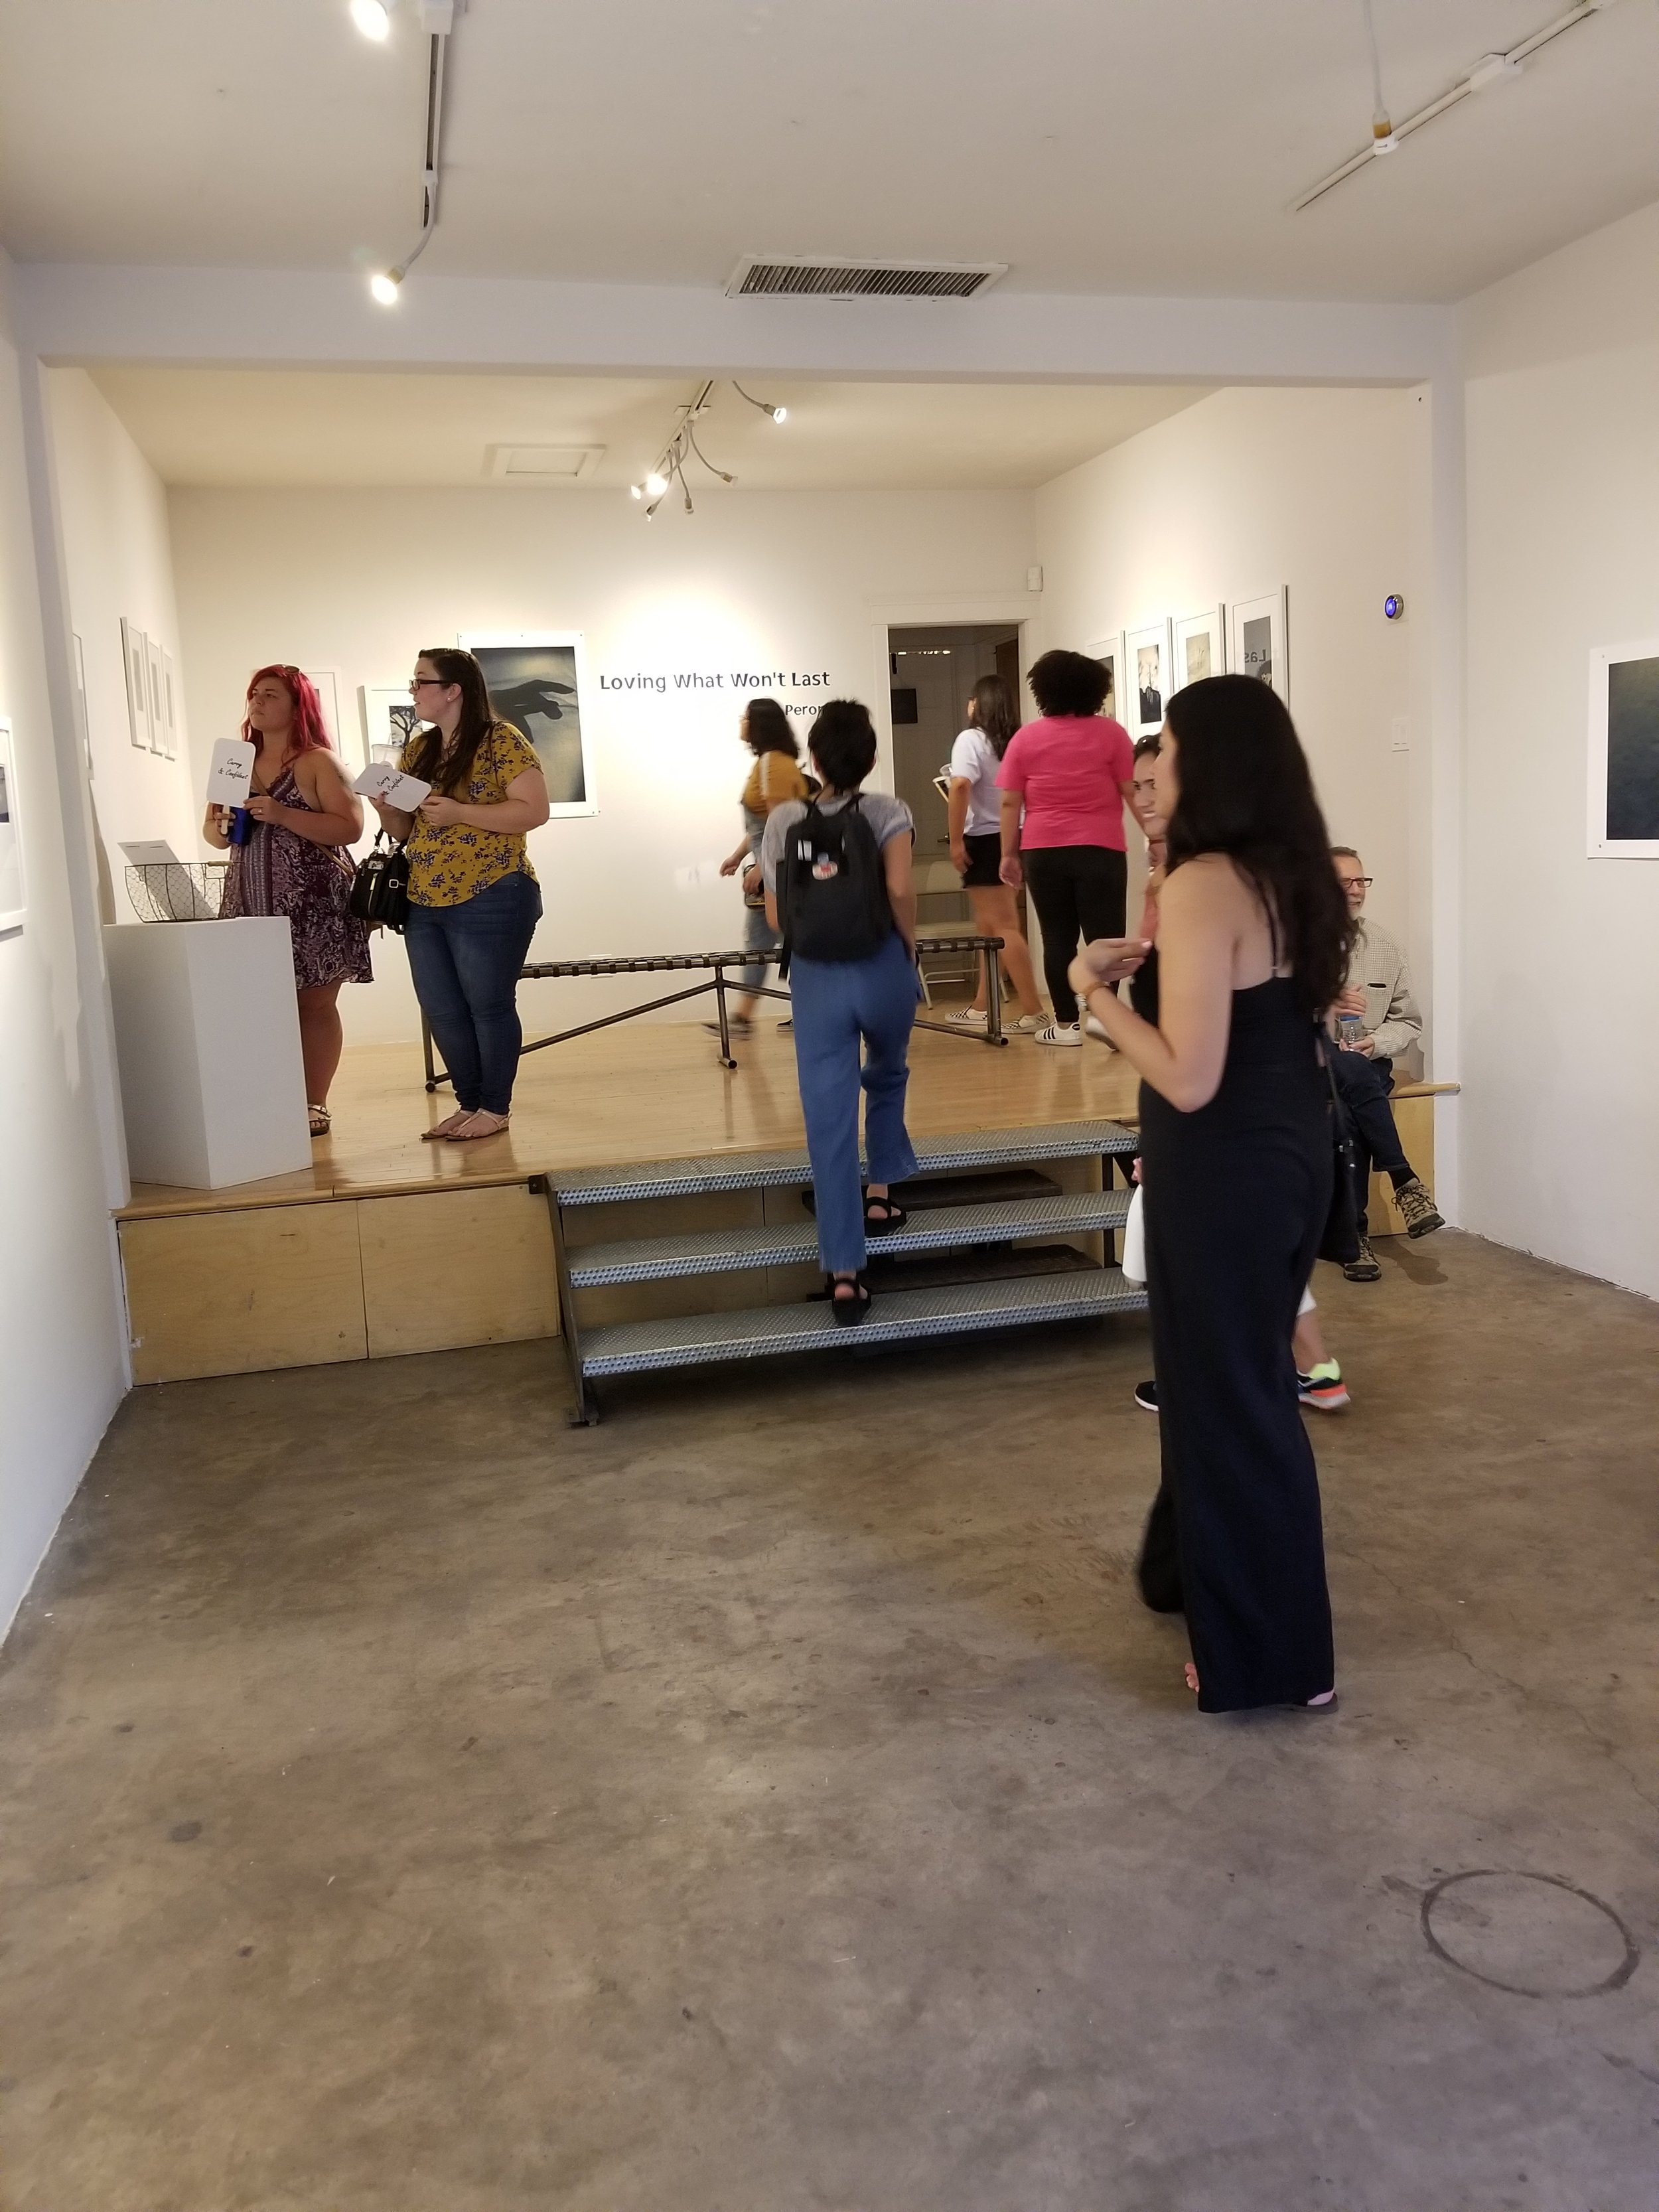 Visitors at "Loving What Won't Last" - Solo Exhibition at eye lounge gallery (Phoenix, AZ) 2018